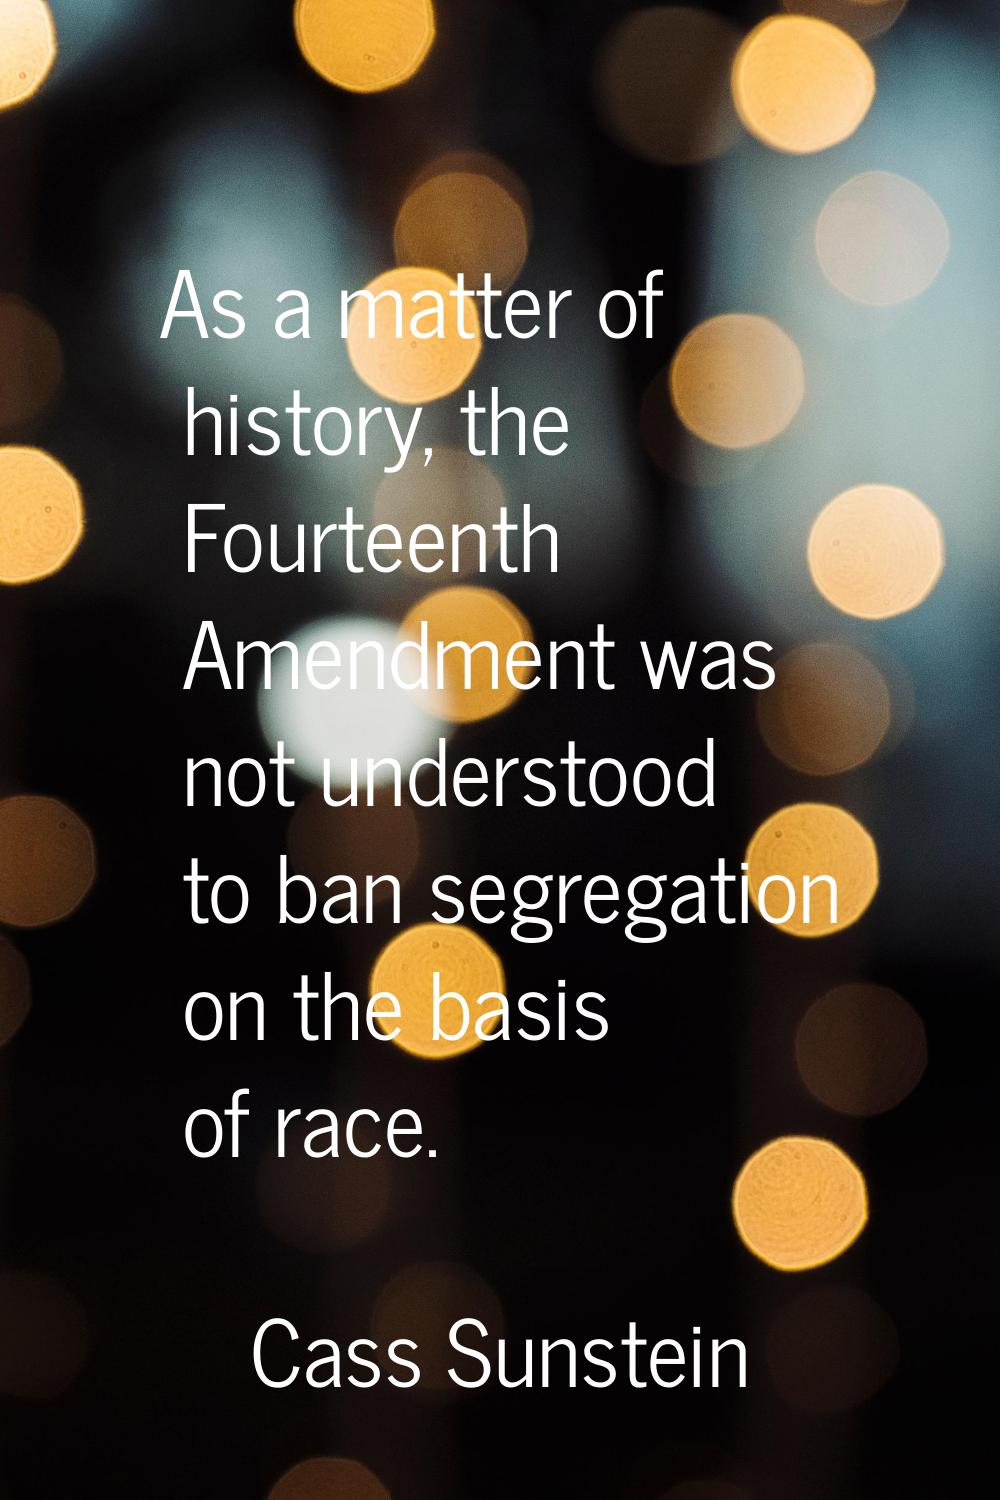 As a matter of history, the Fourteenth Amendment was not understood to ban segregation on the basis